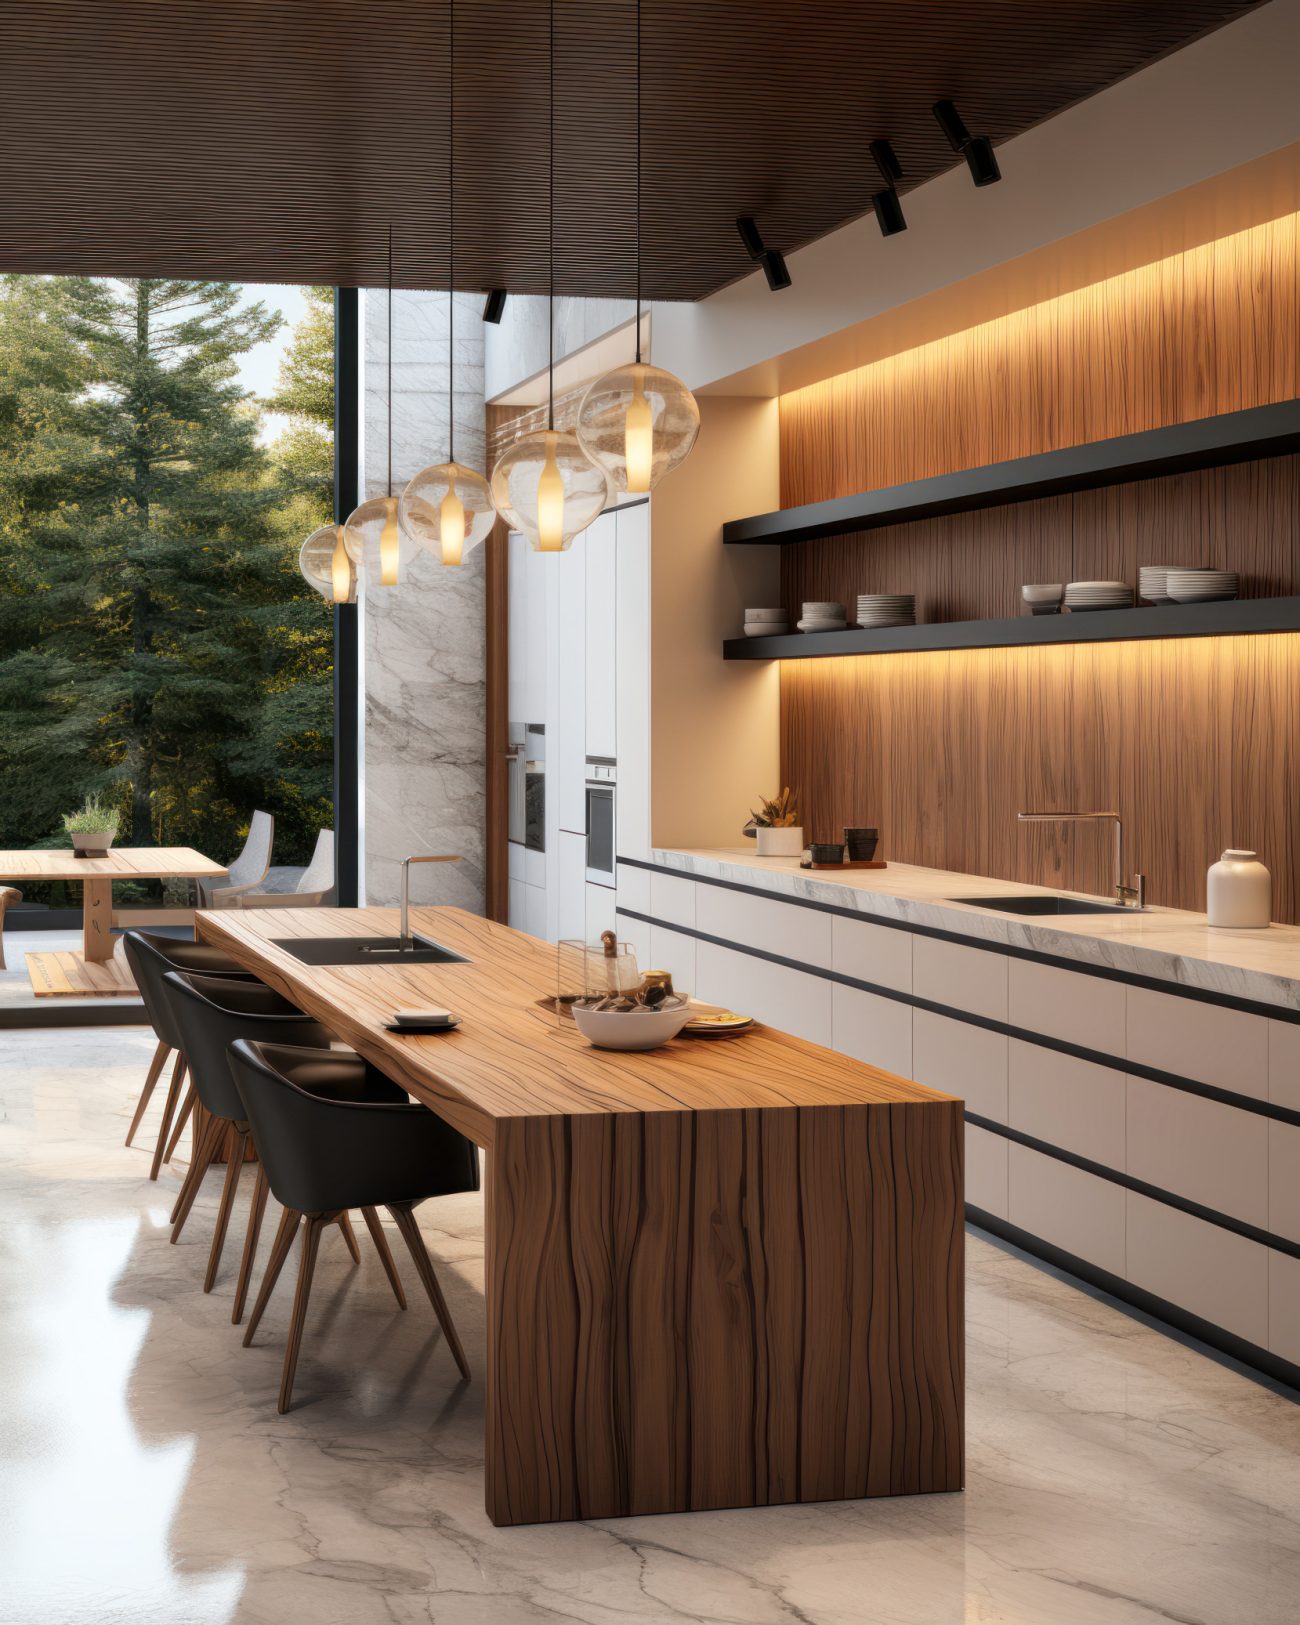 Wooden island with sink serving as dining table, light fixtures, grey kitchen countertop, polished cement floor, complemented by wood-panelled walls